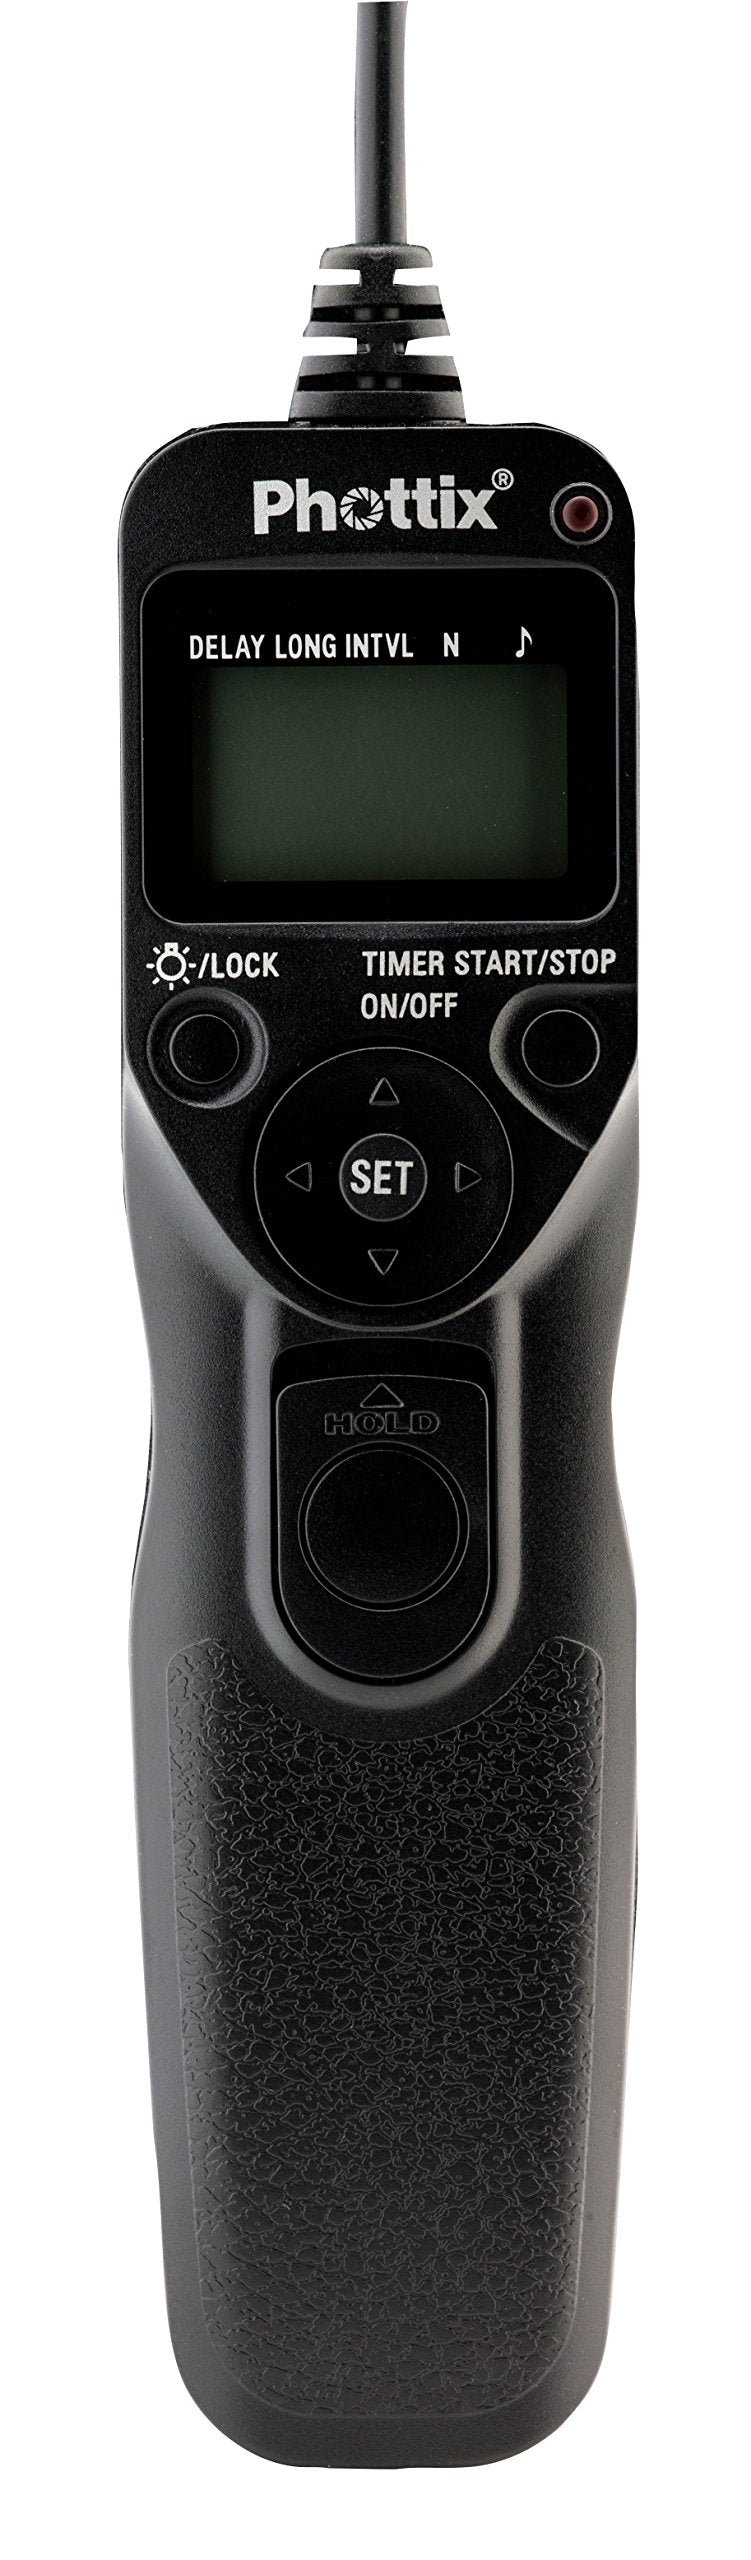 Phottix Multi-Function Camera Remote with Digital Timer TR-90 for Canon